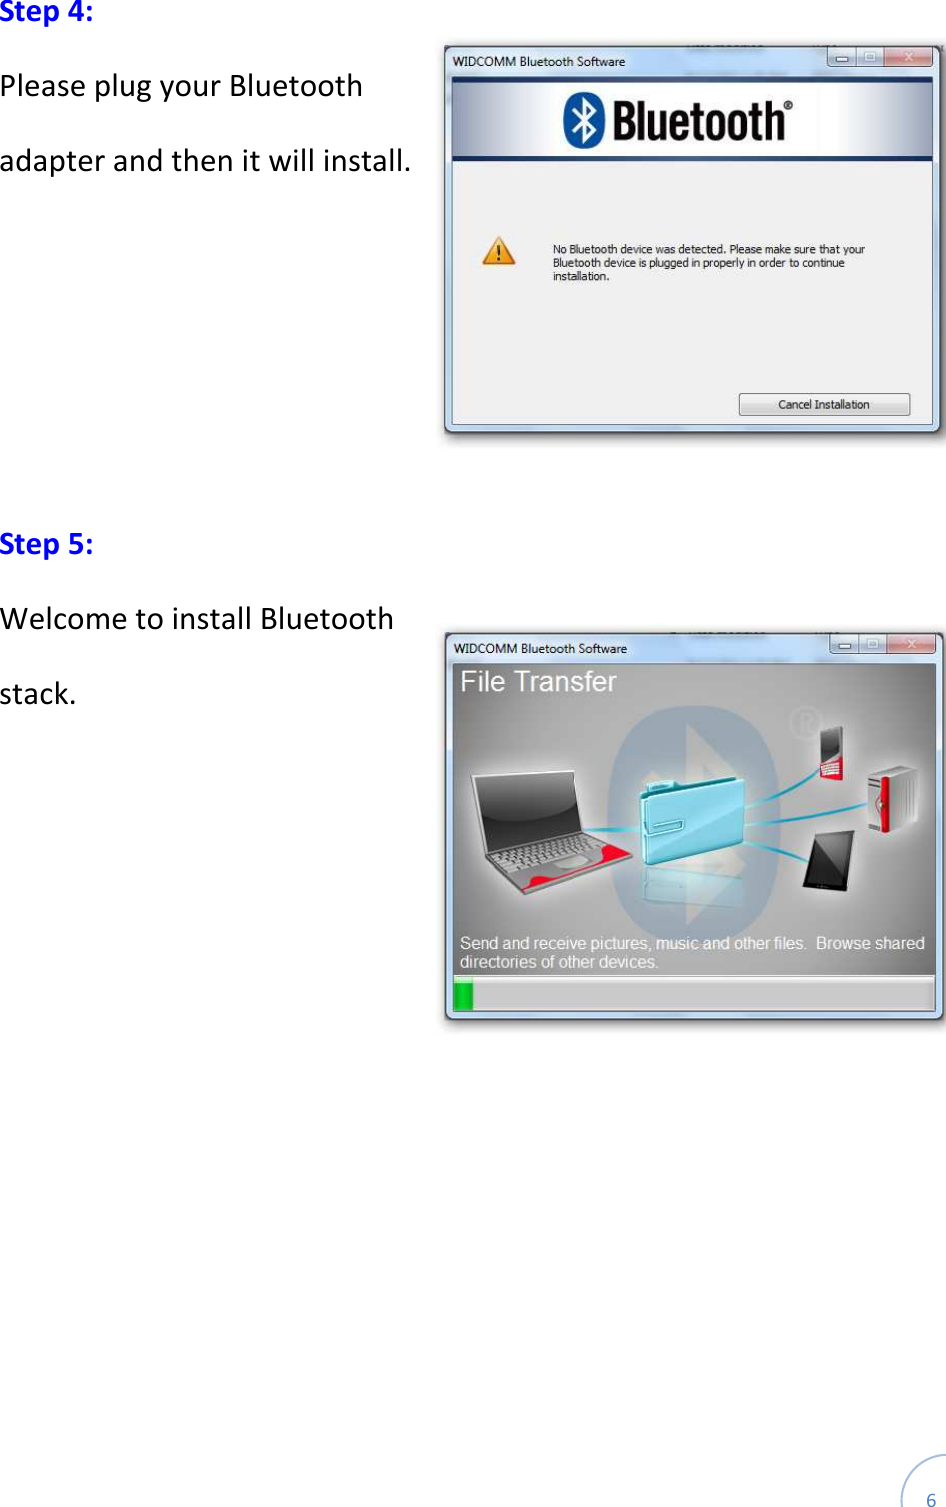  6 Step 4: Please plug your Bluetooth adapter and then it will install.     Step 5: Welcome to install Bluetooth stack.    